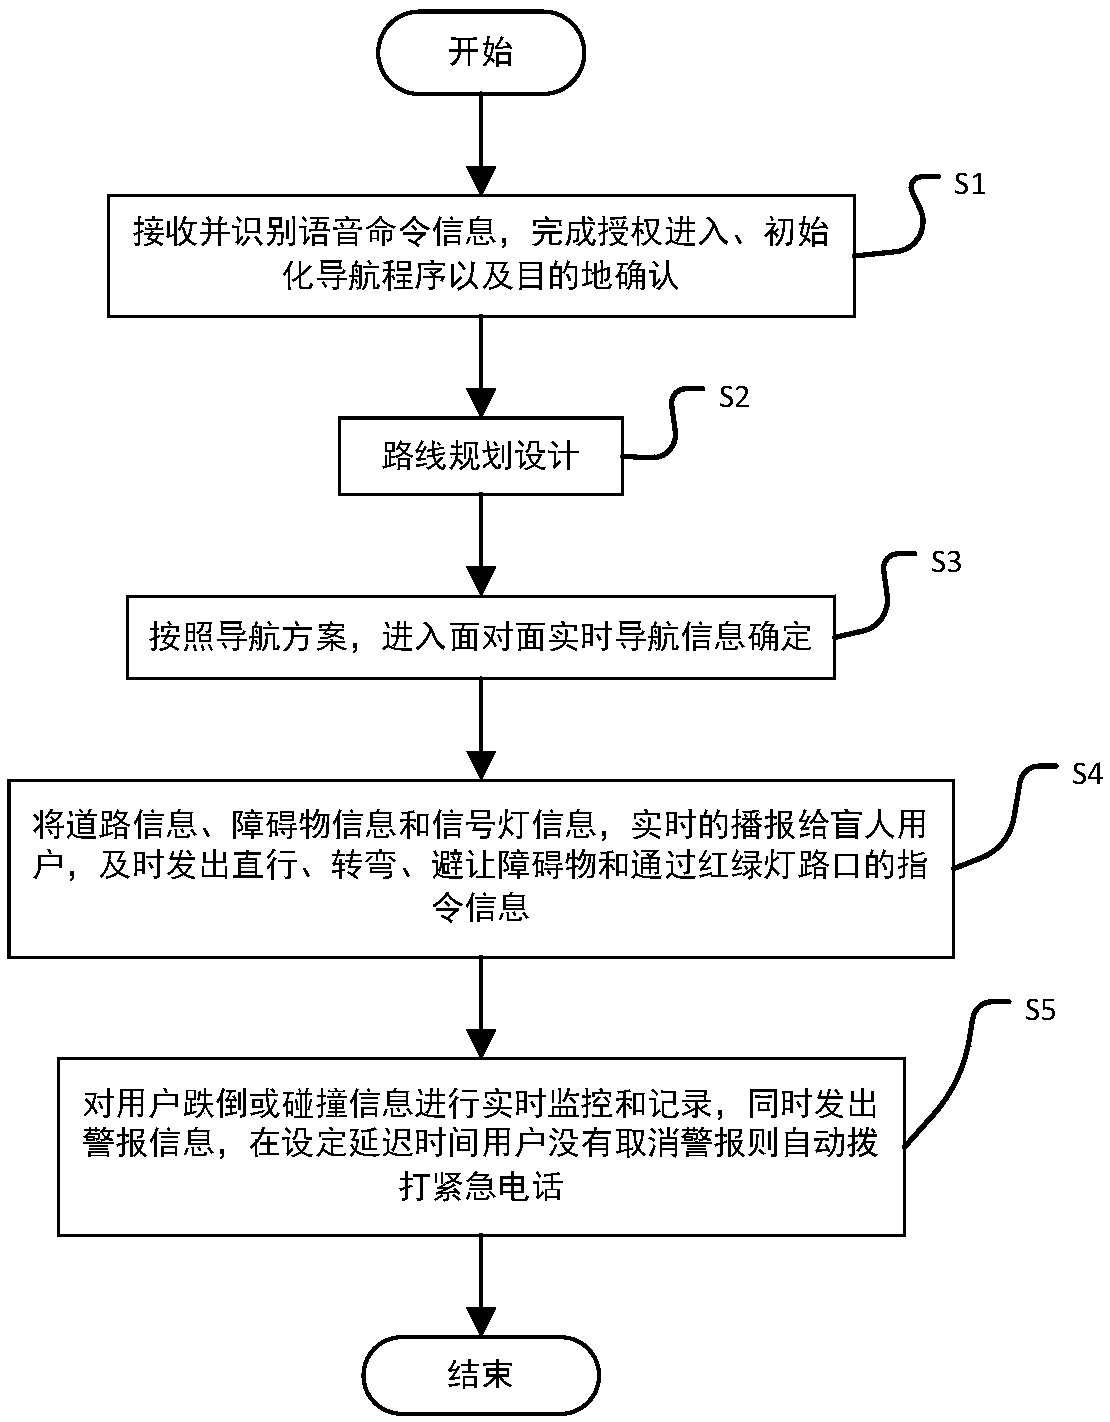 Navigation method and system based on speech recognition admission for blind person